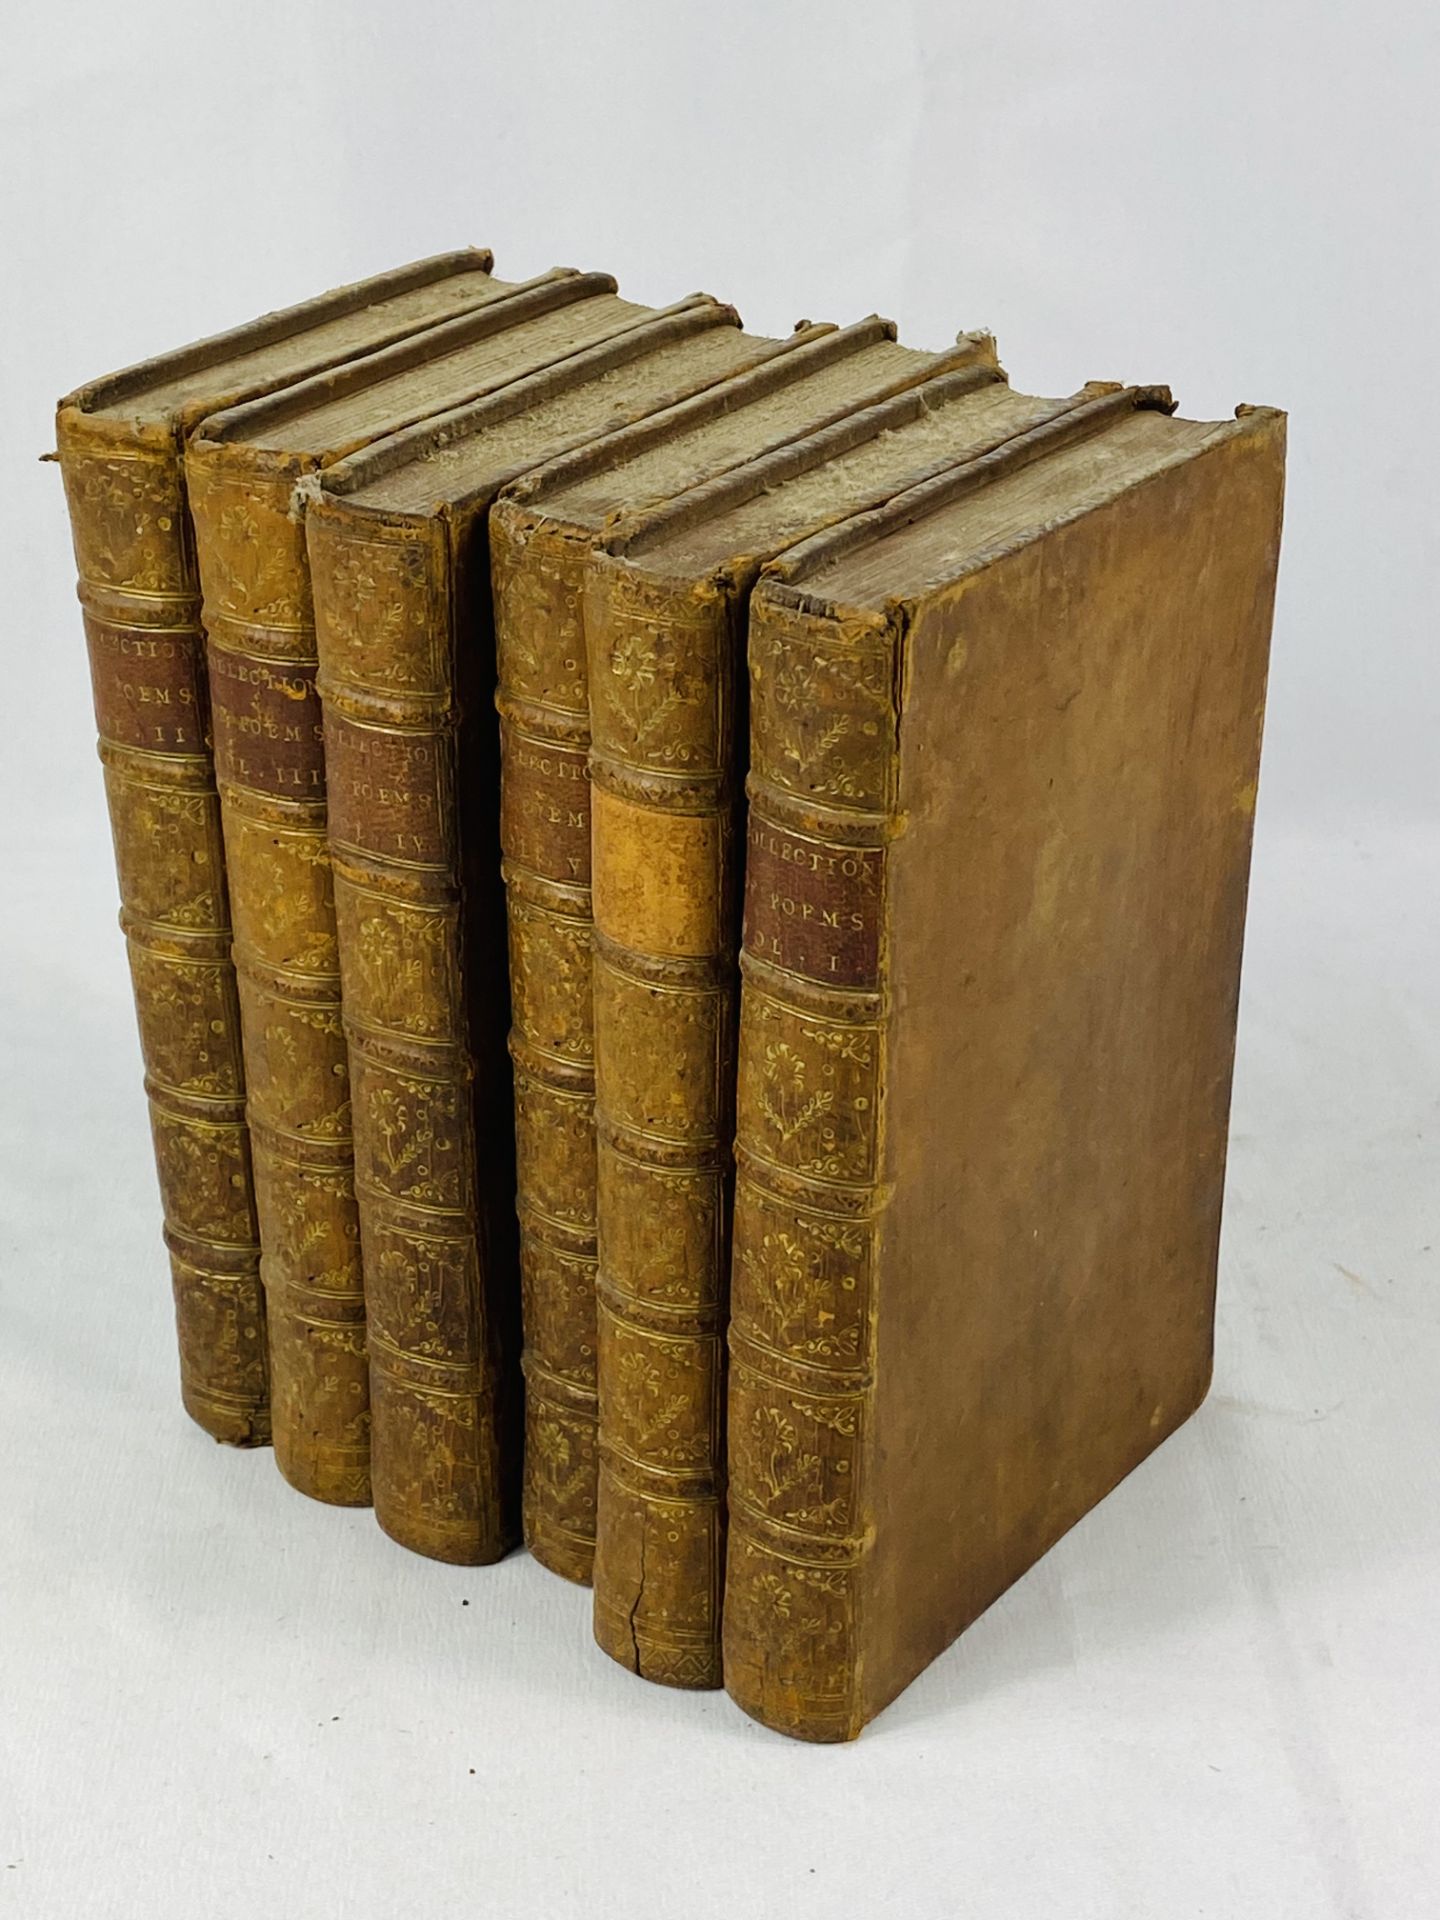 A Collection of Poems in Six Volumes by Several Hands, 1758